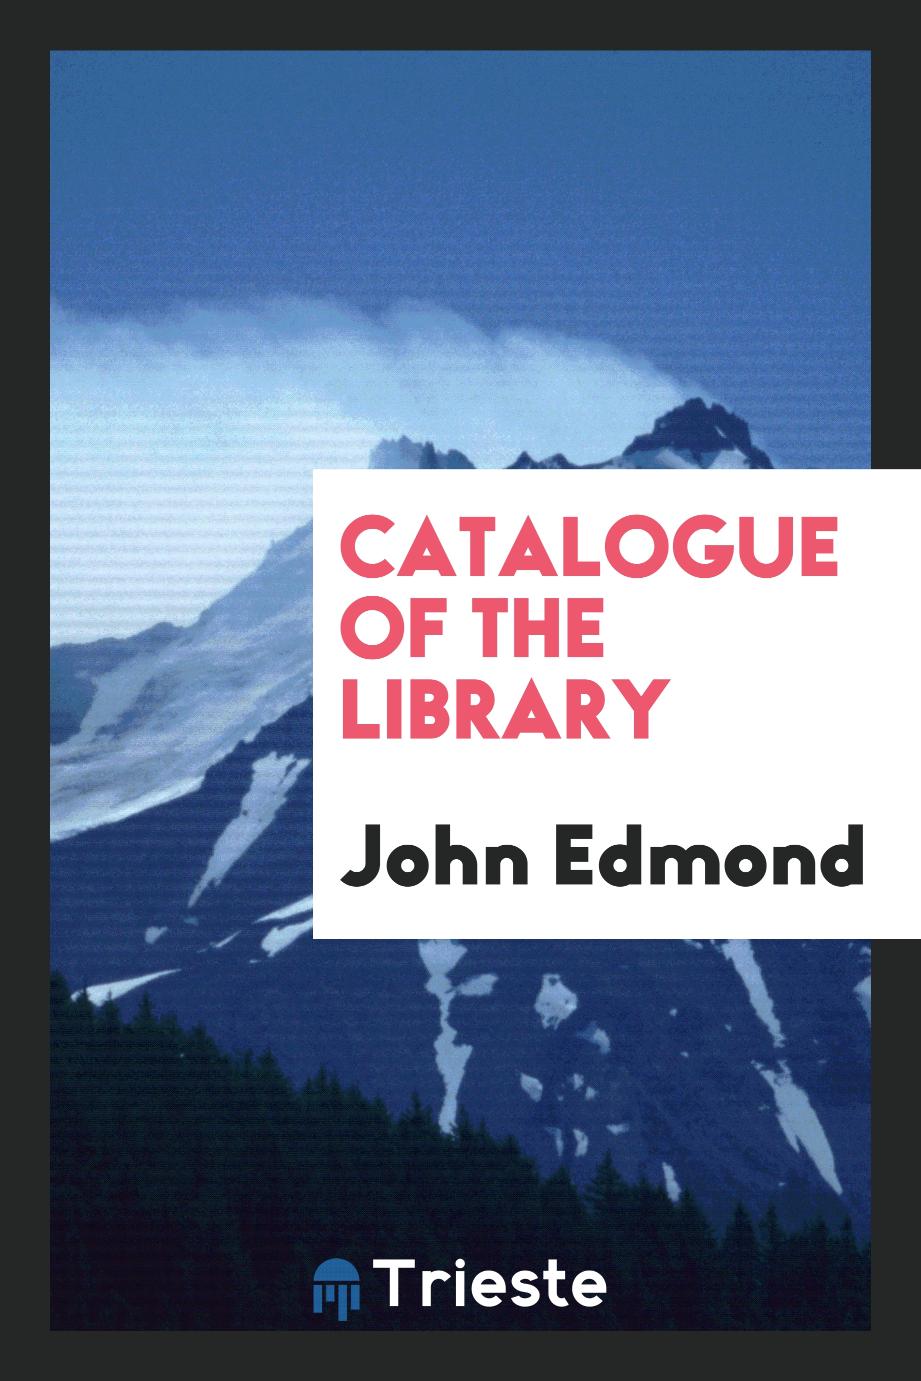 Catalogue of the library